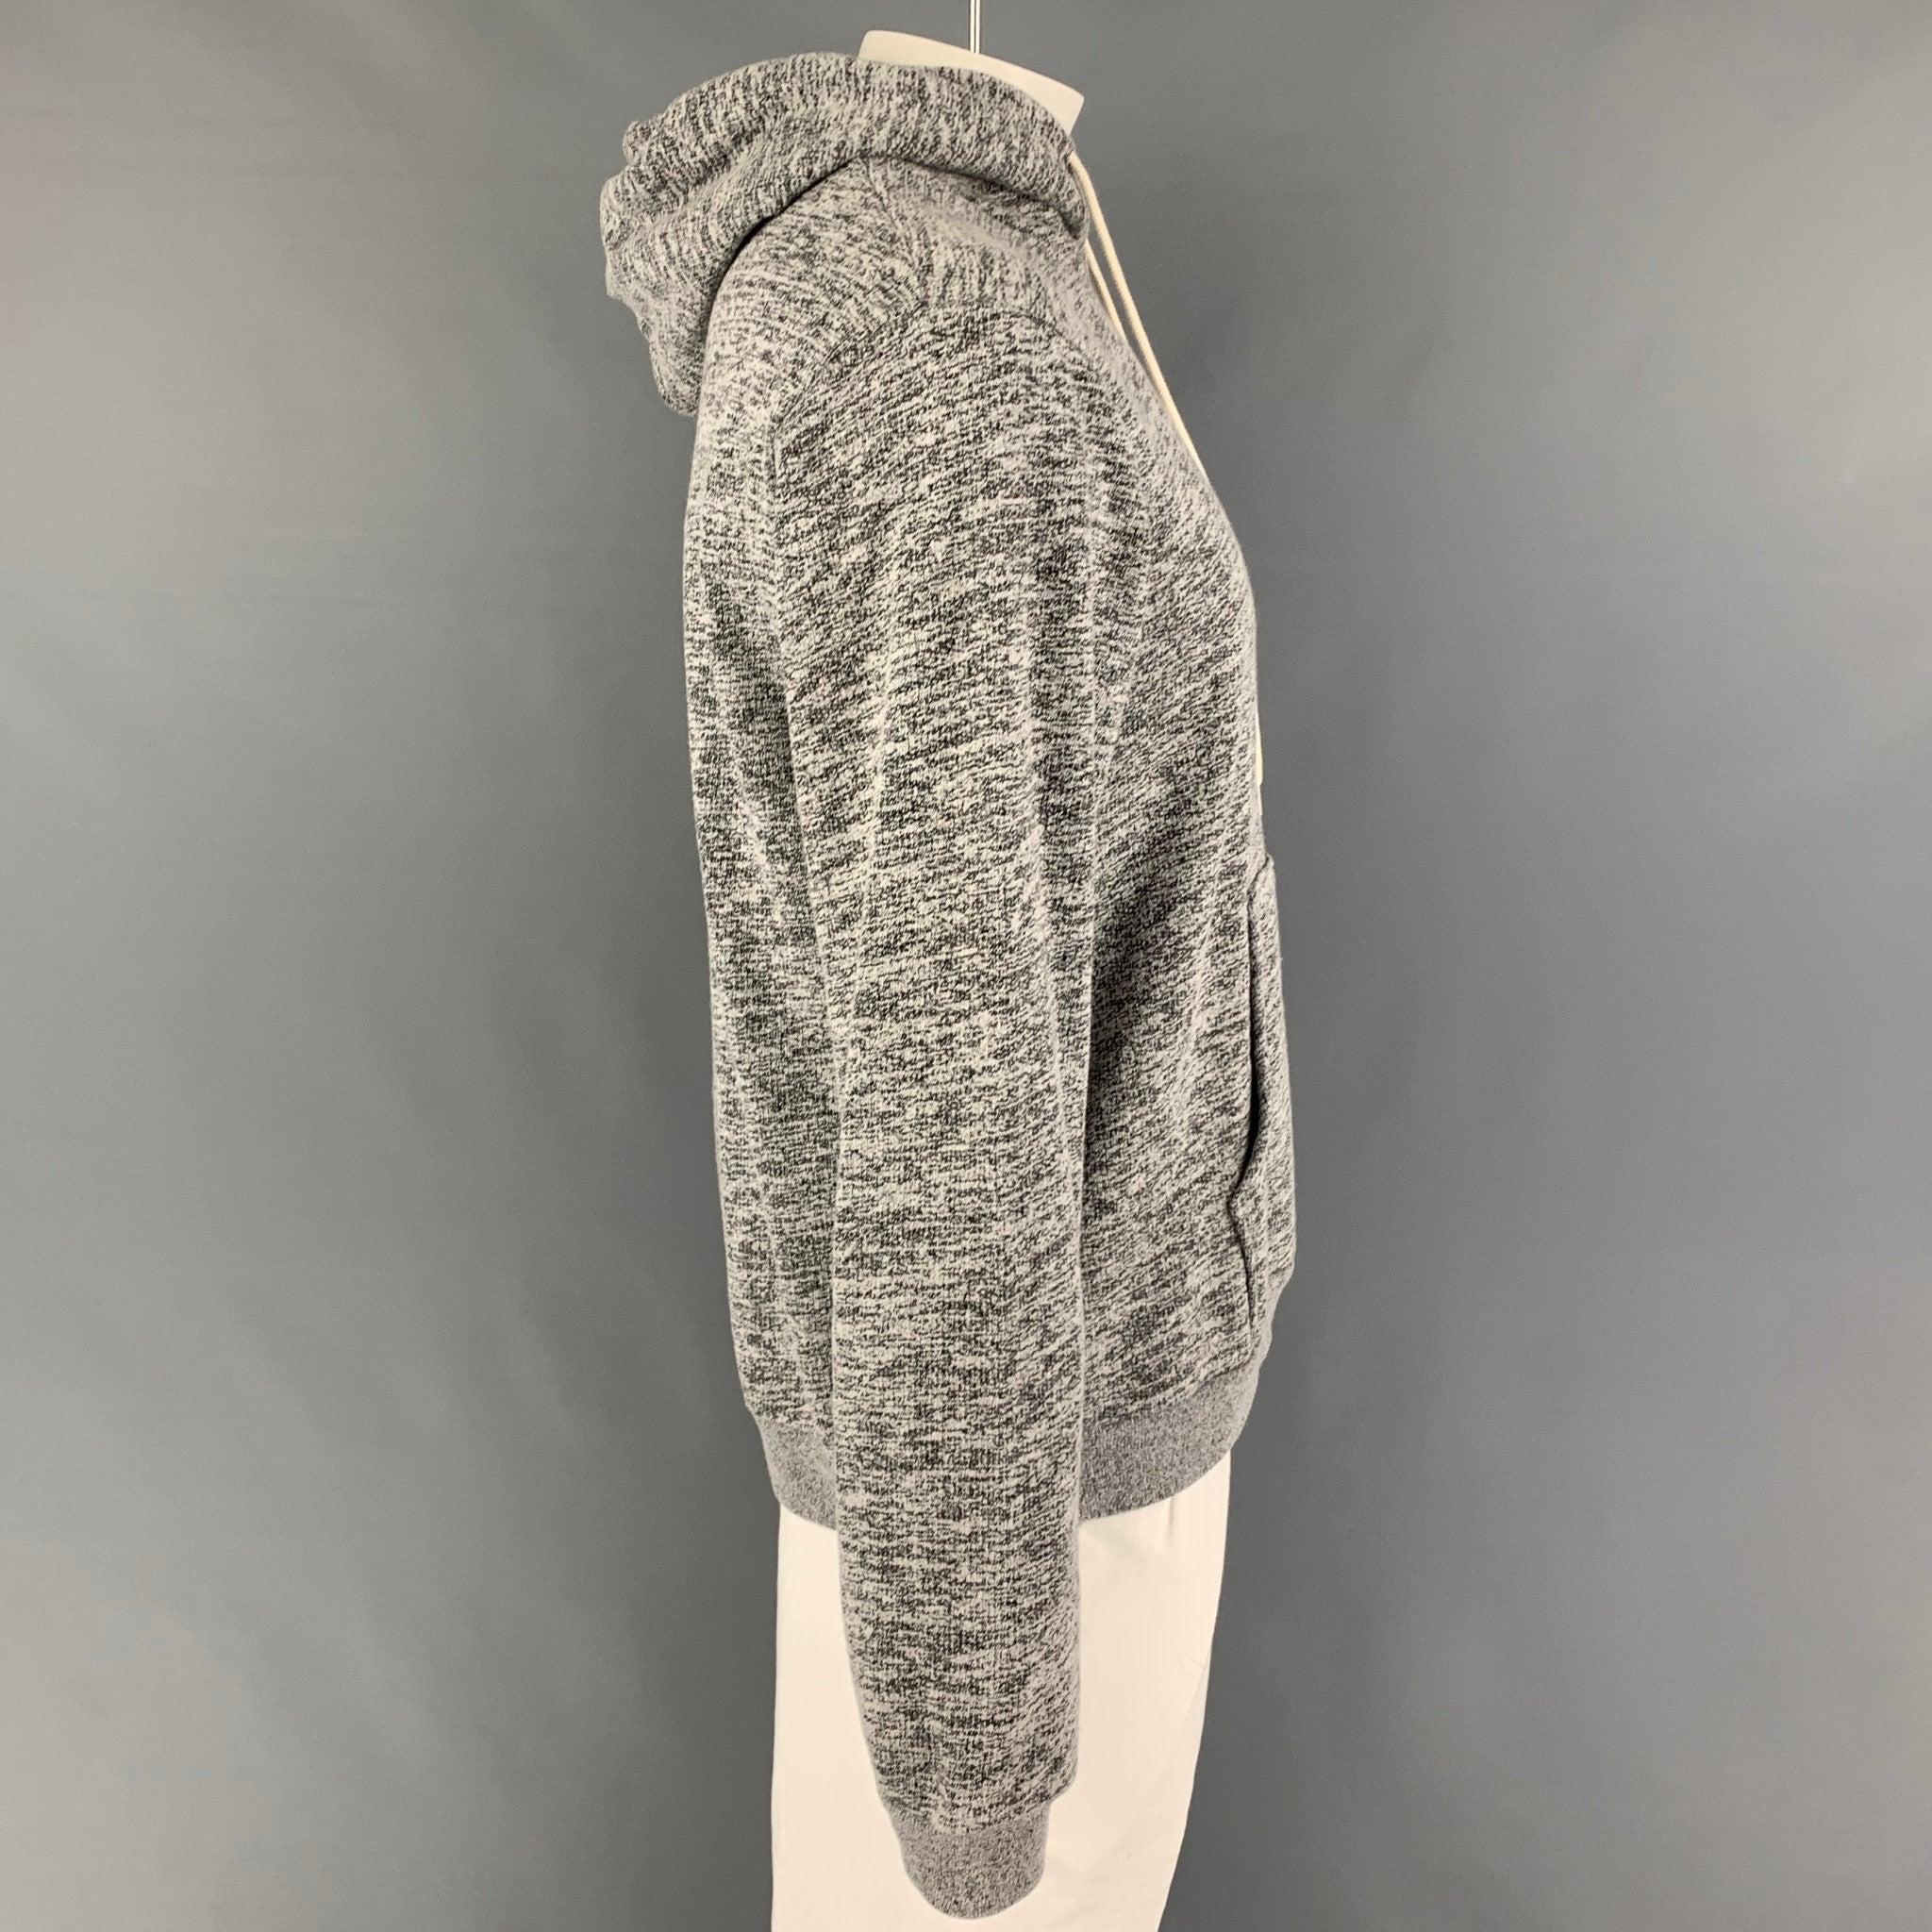 JOHN ELLIOTT sweatshirt comes in a grey heather cotton / polyester featuring a hooded style, pouch pocket, and a drawstring detail.
Very Good
Pre-Owned Condition. 

Marked:   4 

Measurements: 
 
Shoulder: 20.5 inches Chest: 44 inches Sleeve: 28